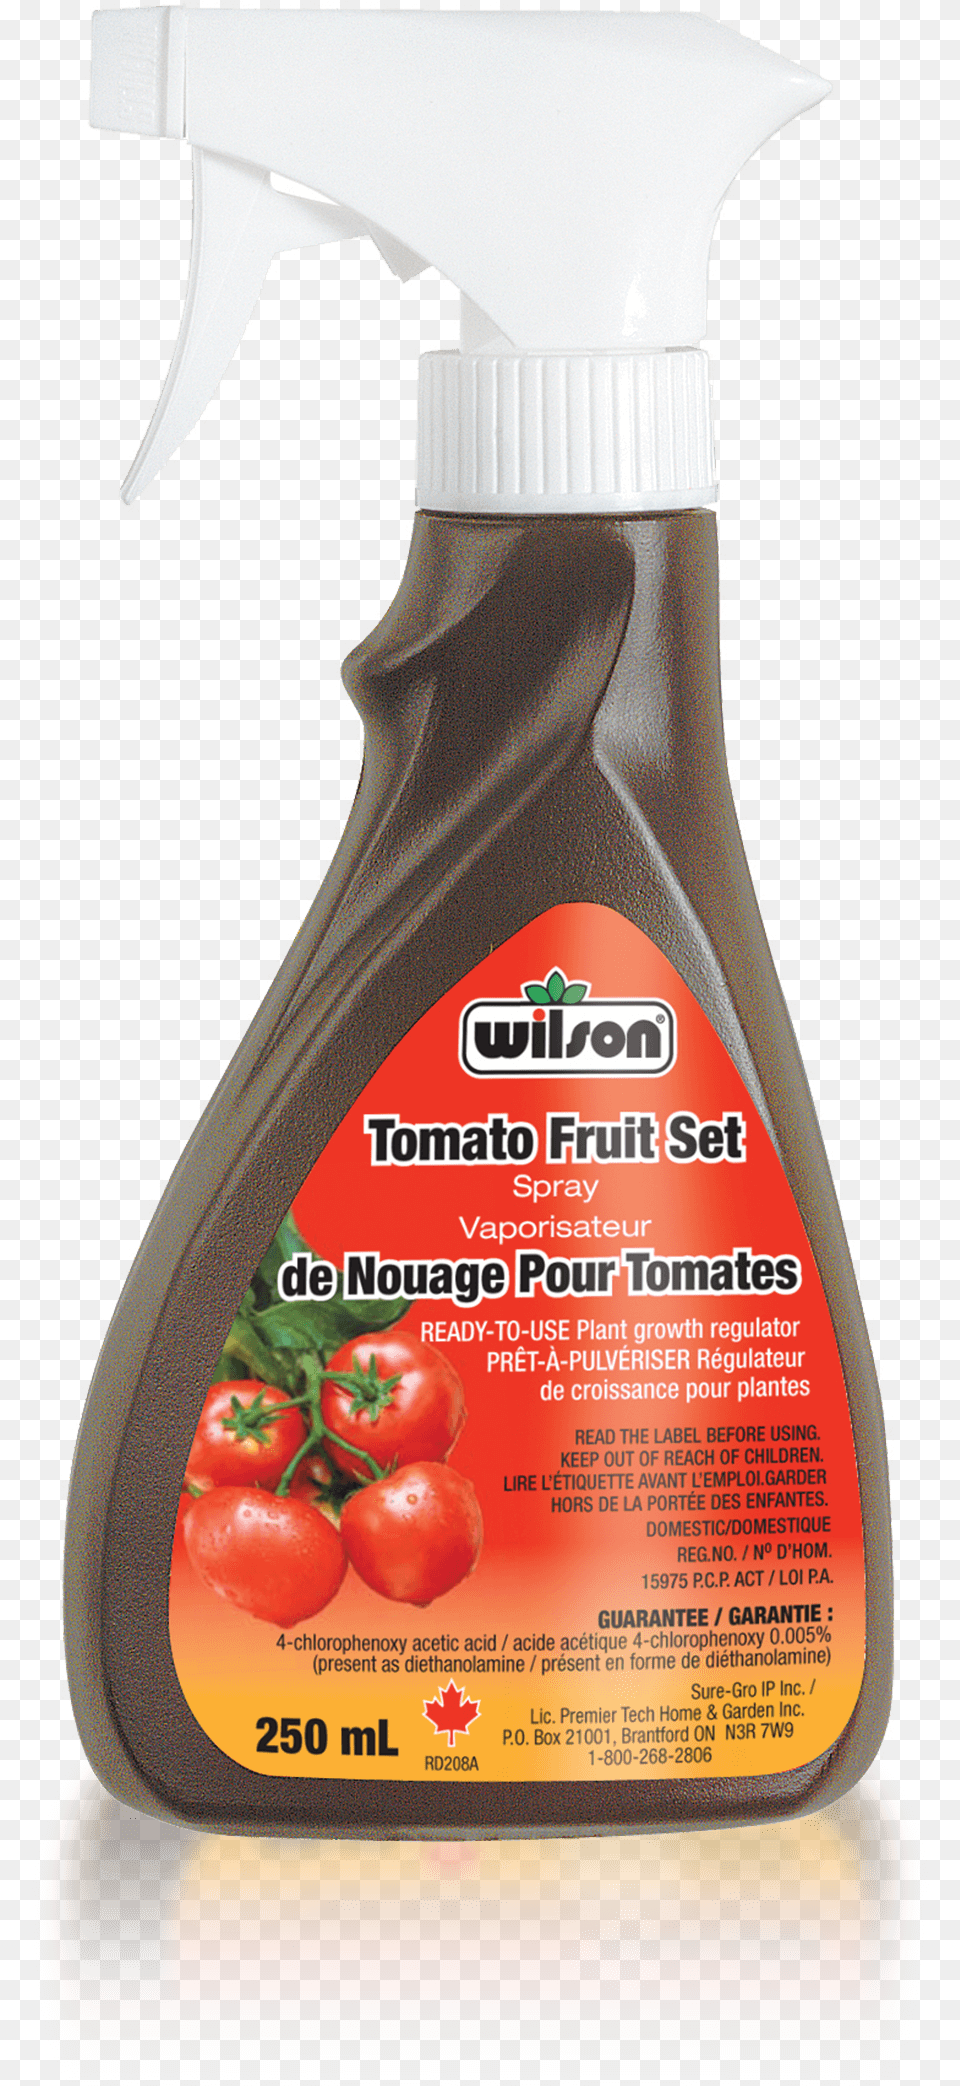 Wilson Tomato Fruit Set Spray Cycle Of A Tomato Plant, Tin, Food, Can, Spray Can Png Image